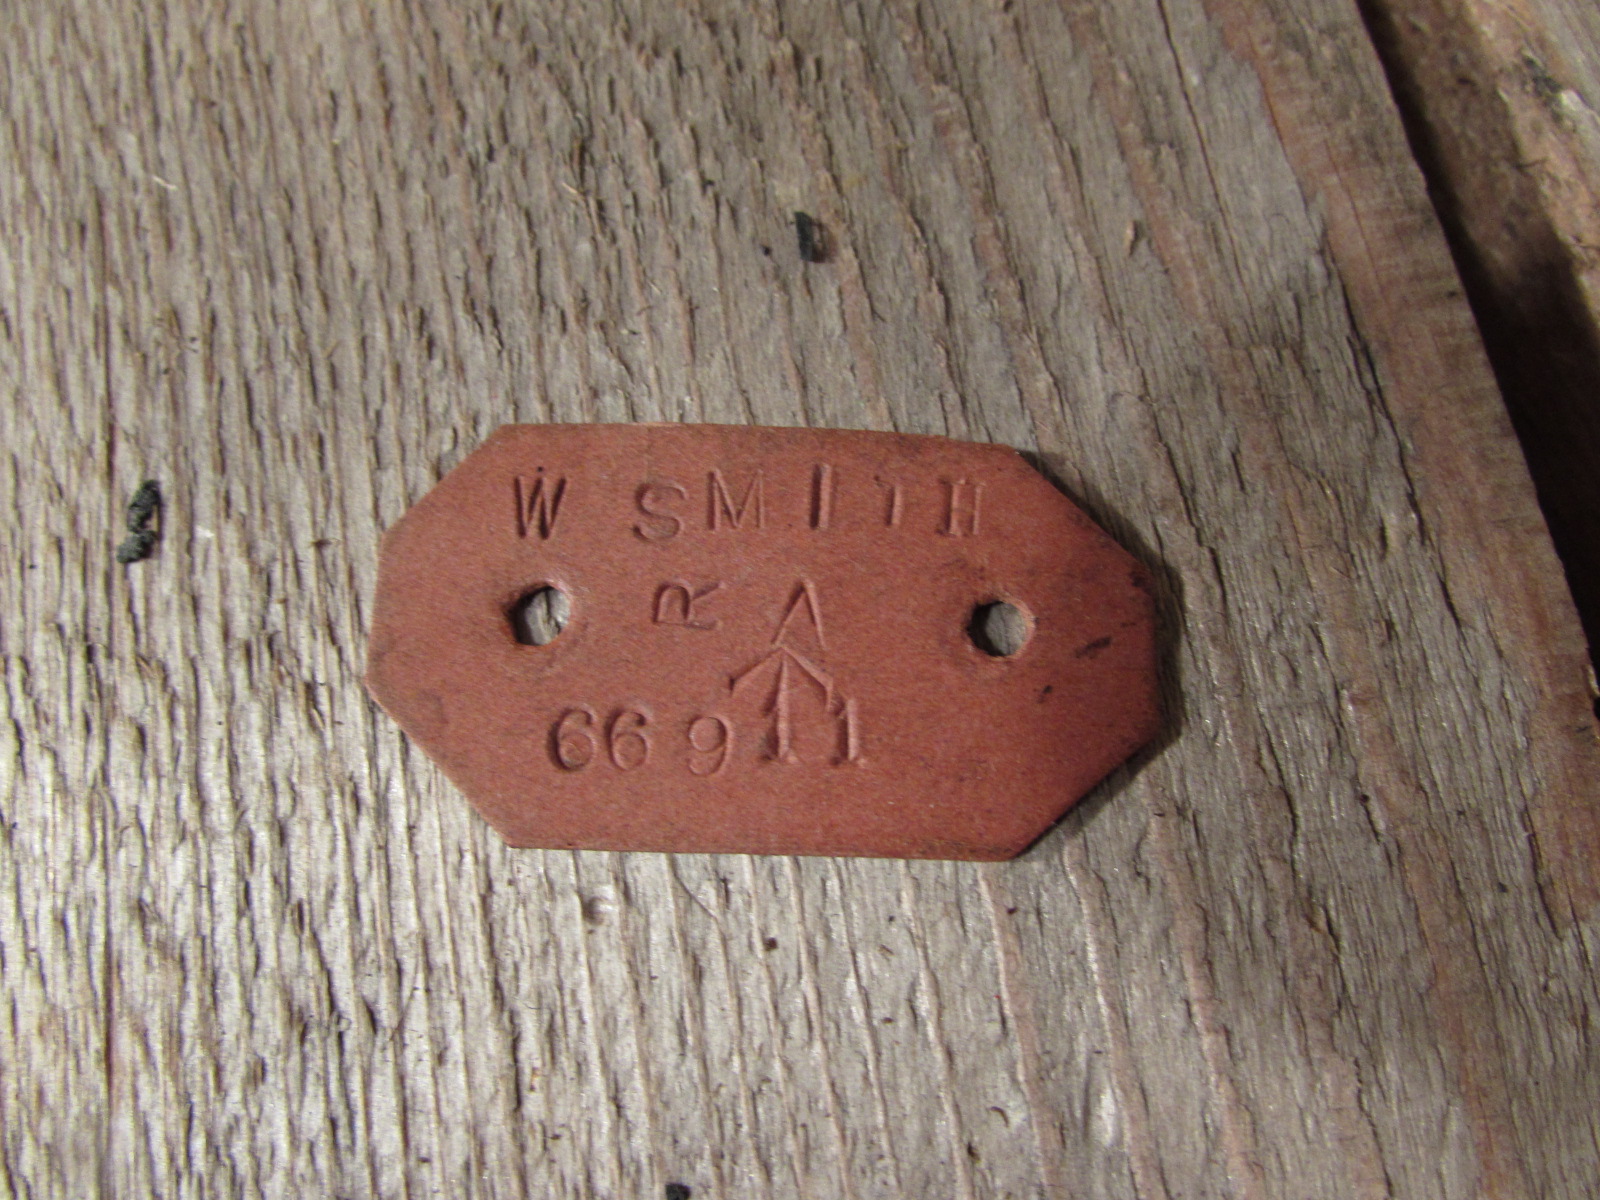 Grave marking tag, WWII 1